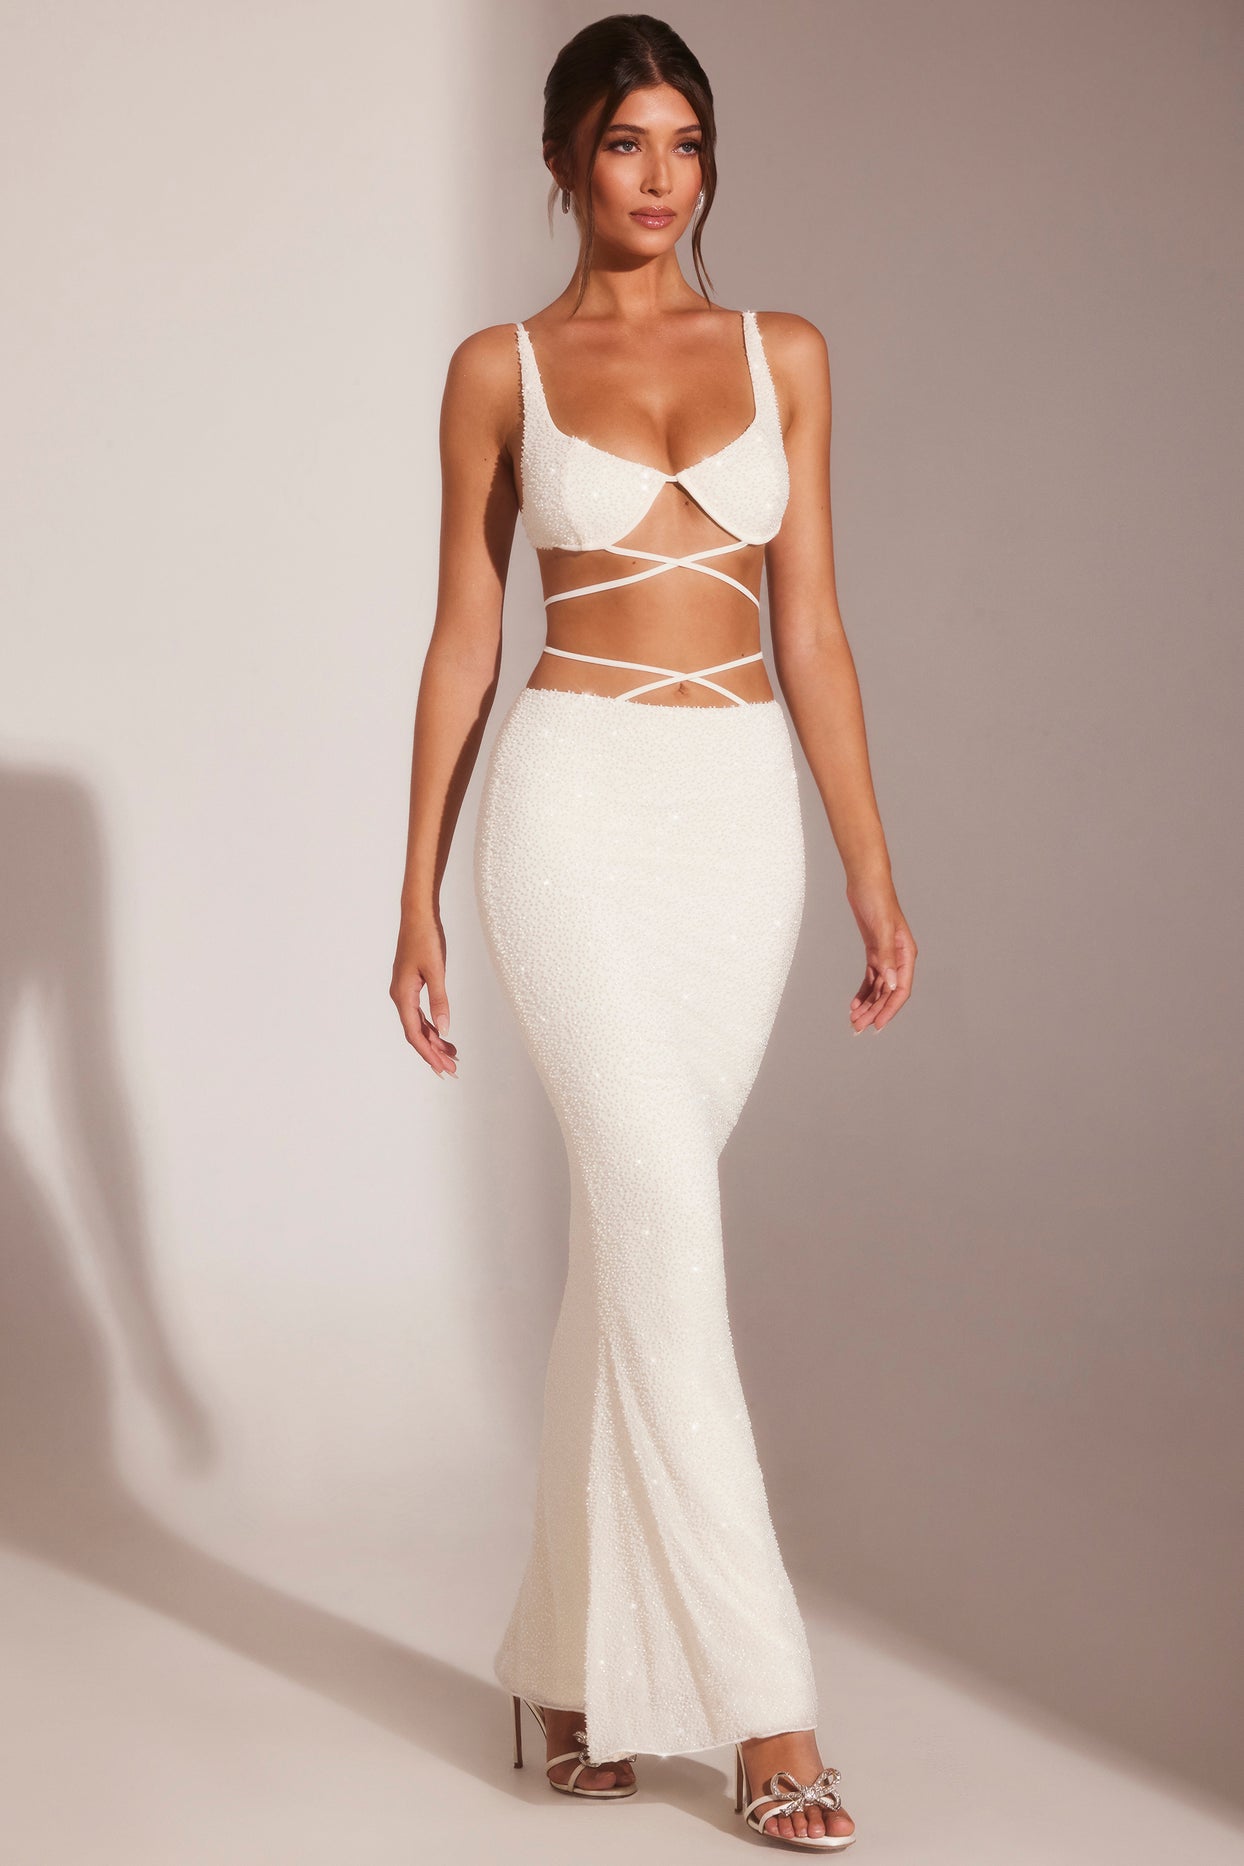 Embellished Strappy Maxi Skirt in White